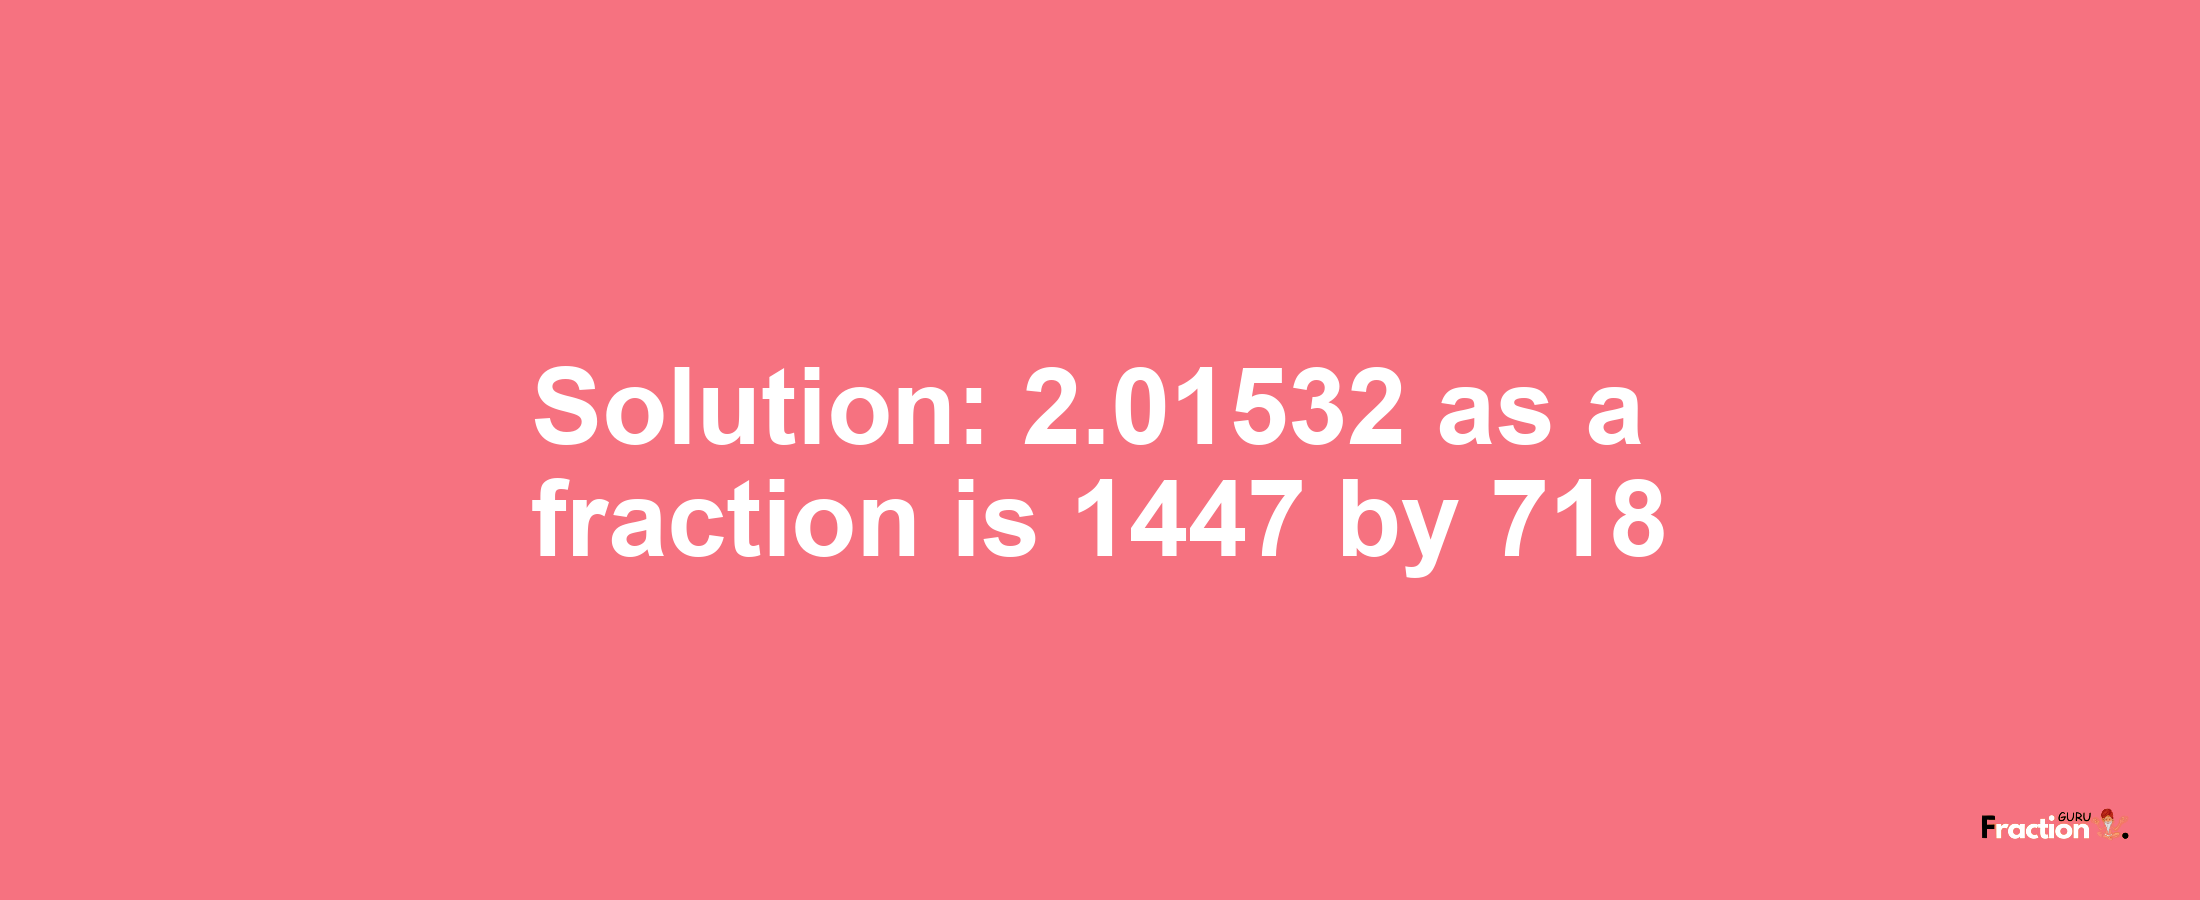 Solution:2.01532 as a fraction is 1447/718